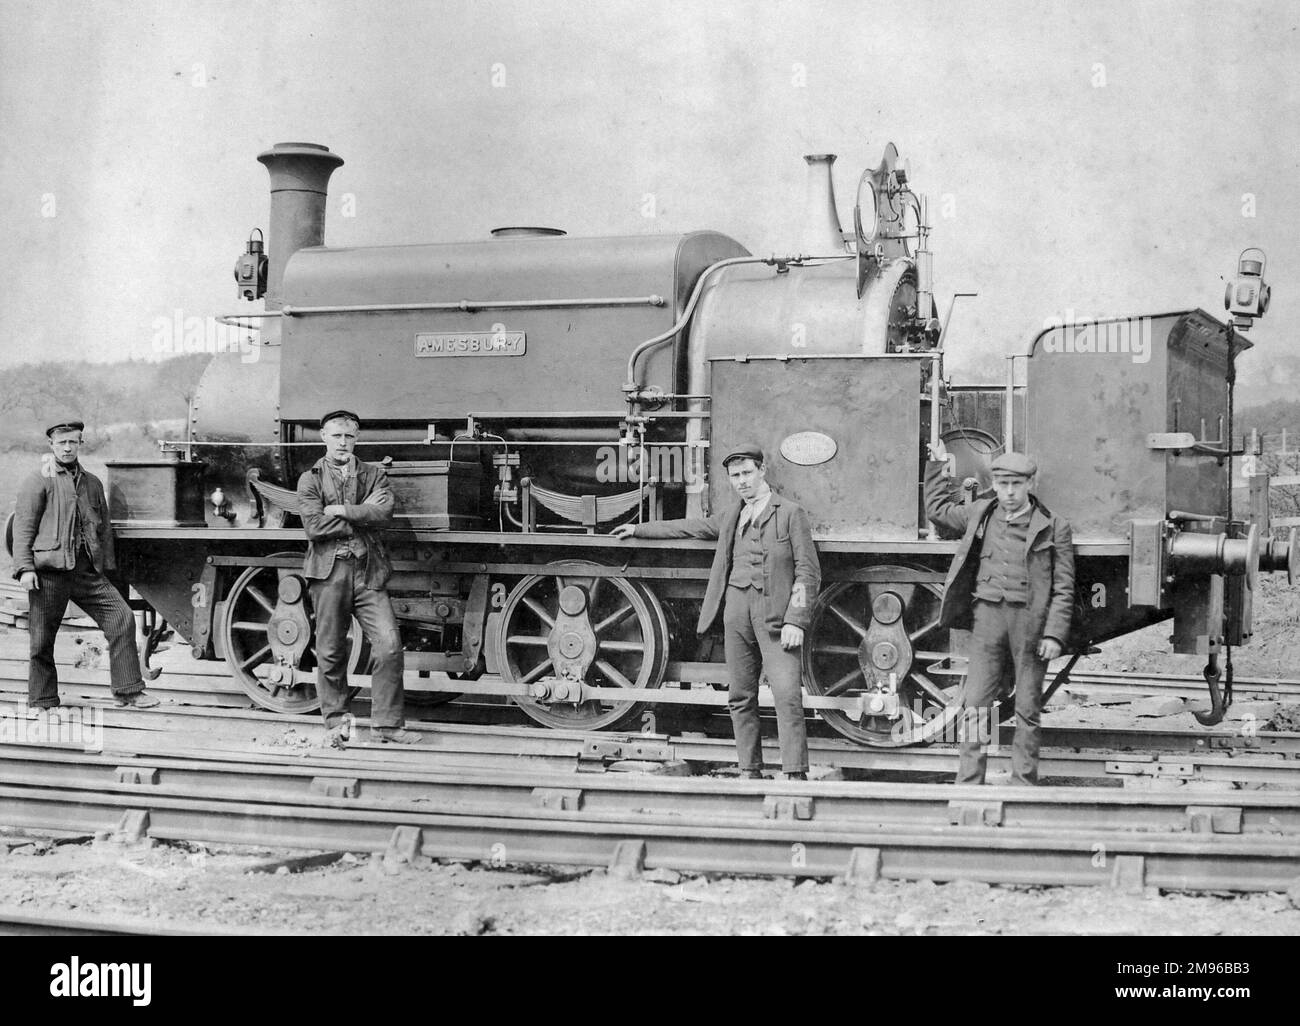 Four railway workers with a Great Western Railway locomotive, Amesbury, at Treffgarne, Nant Y Coy, Pembrokeshire, Dyfed, South Wales.  They are navvies employed in cutting the embankment, seen here at the southern end of the workings. Stock Photo